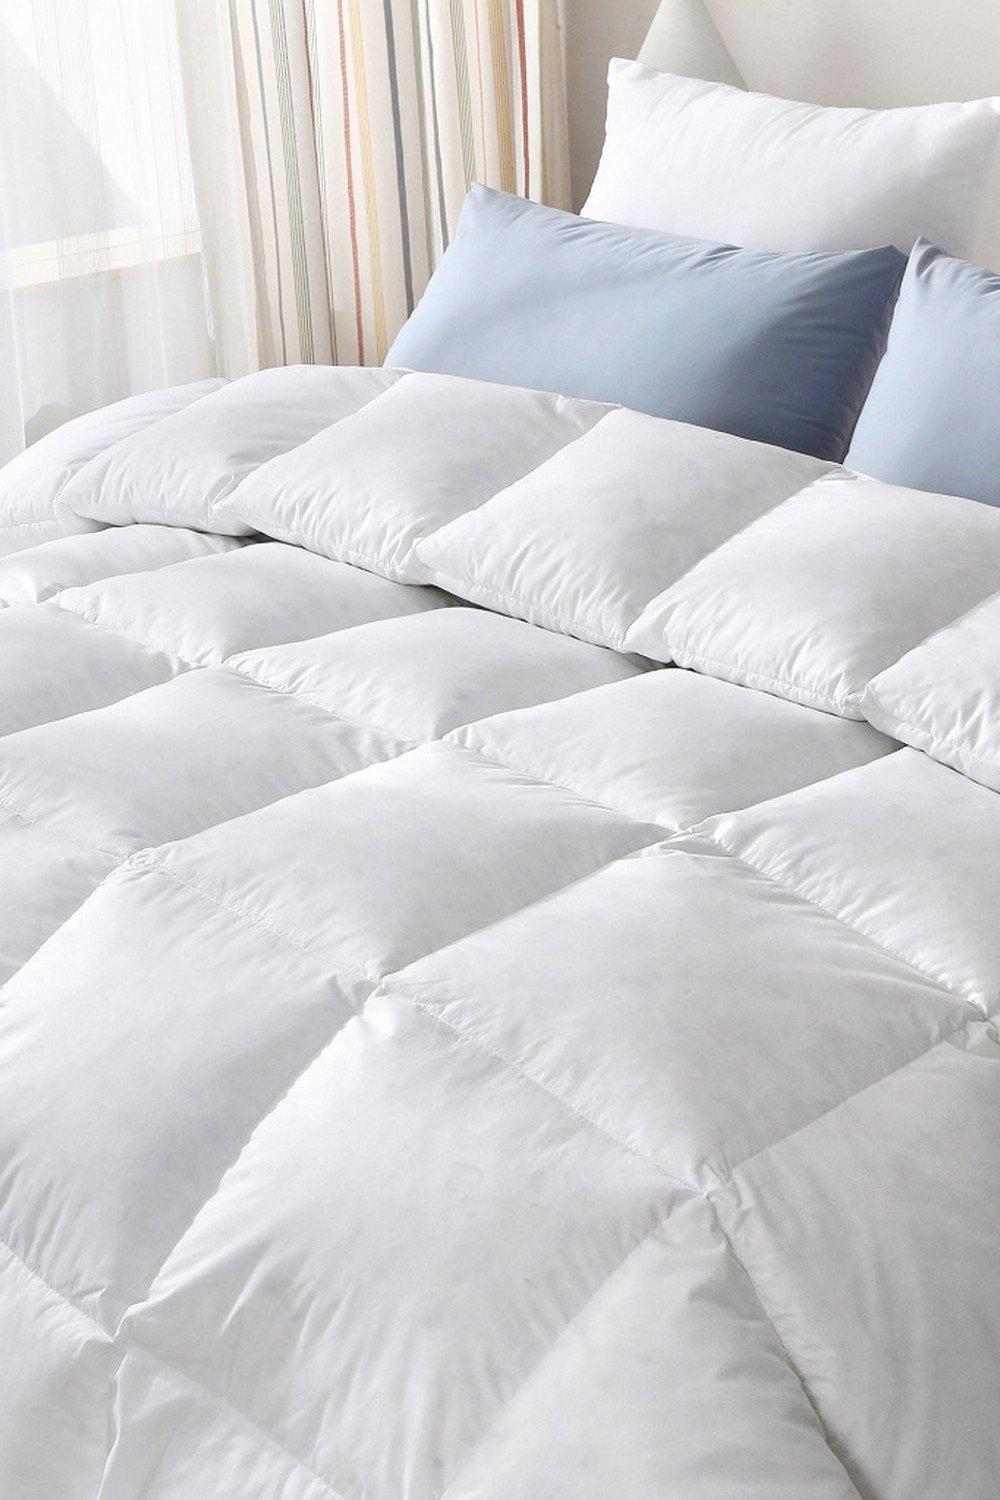 Duck Feather And Down Duvet Quilt Hotel Quality 10.5 tog Summer